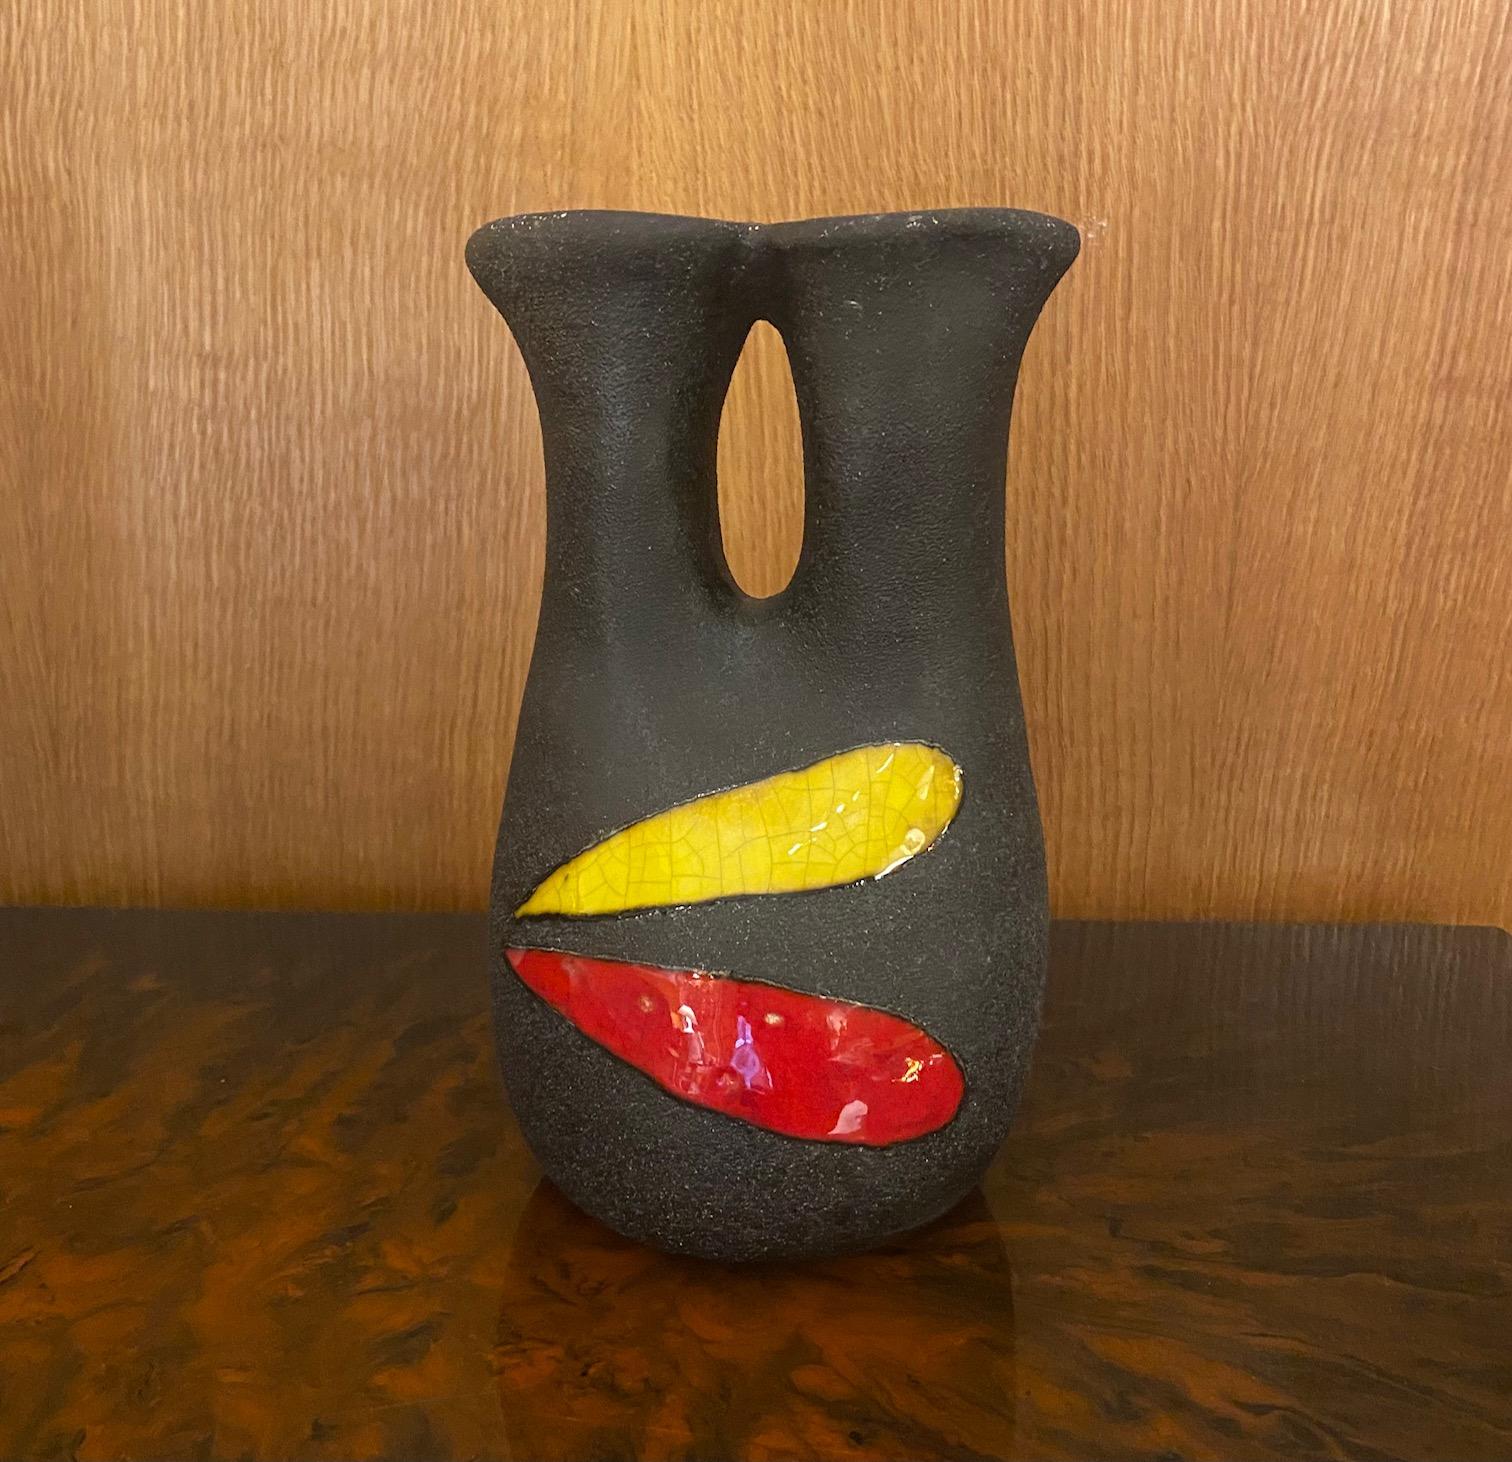 Ceramic vase by Les Archanges/Gilbert Valentin, Vallauris, France, 1950s.
Les Archanges was the name of the workshop created by Gilbert Valentin and his wife Lilette in Vallauris, south of France, in 1950. The name was given by Jean Cocteau, a